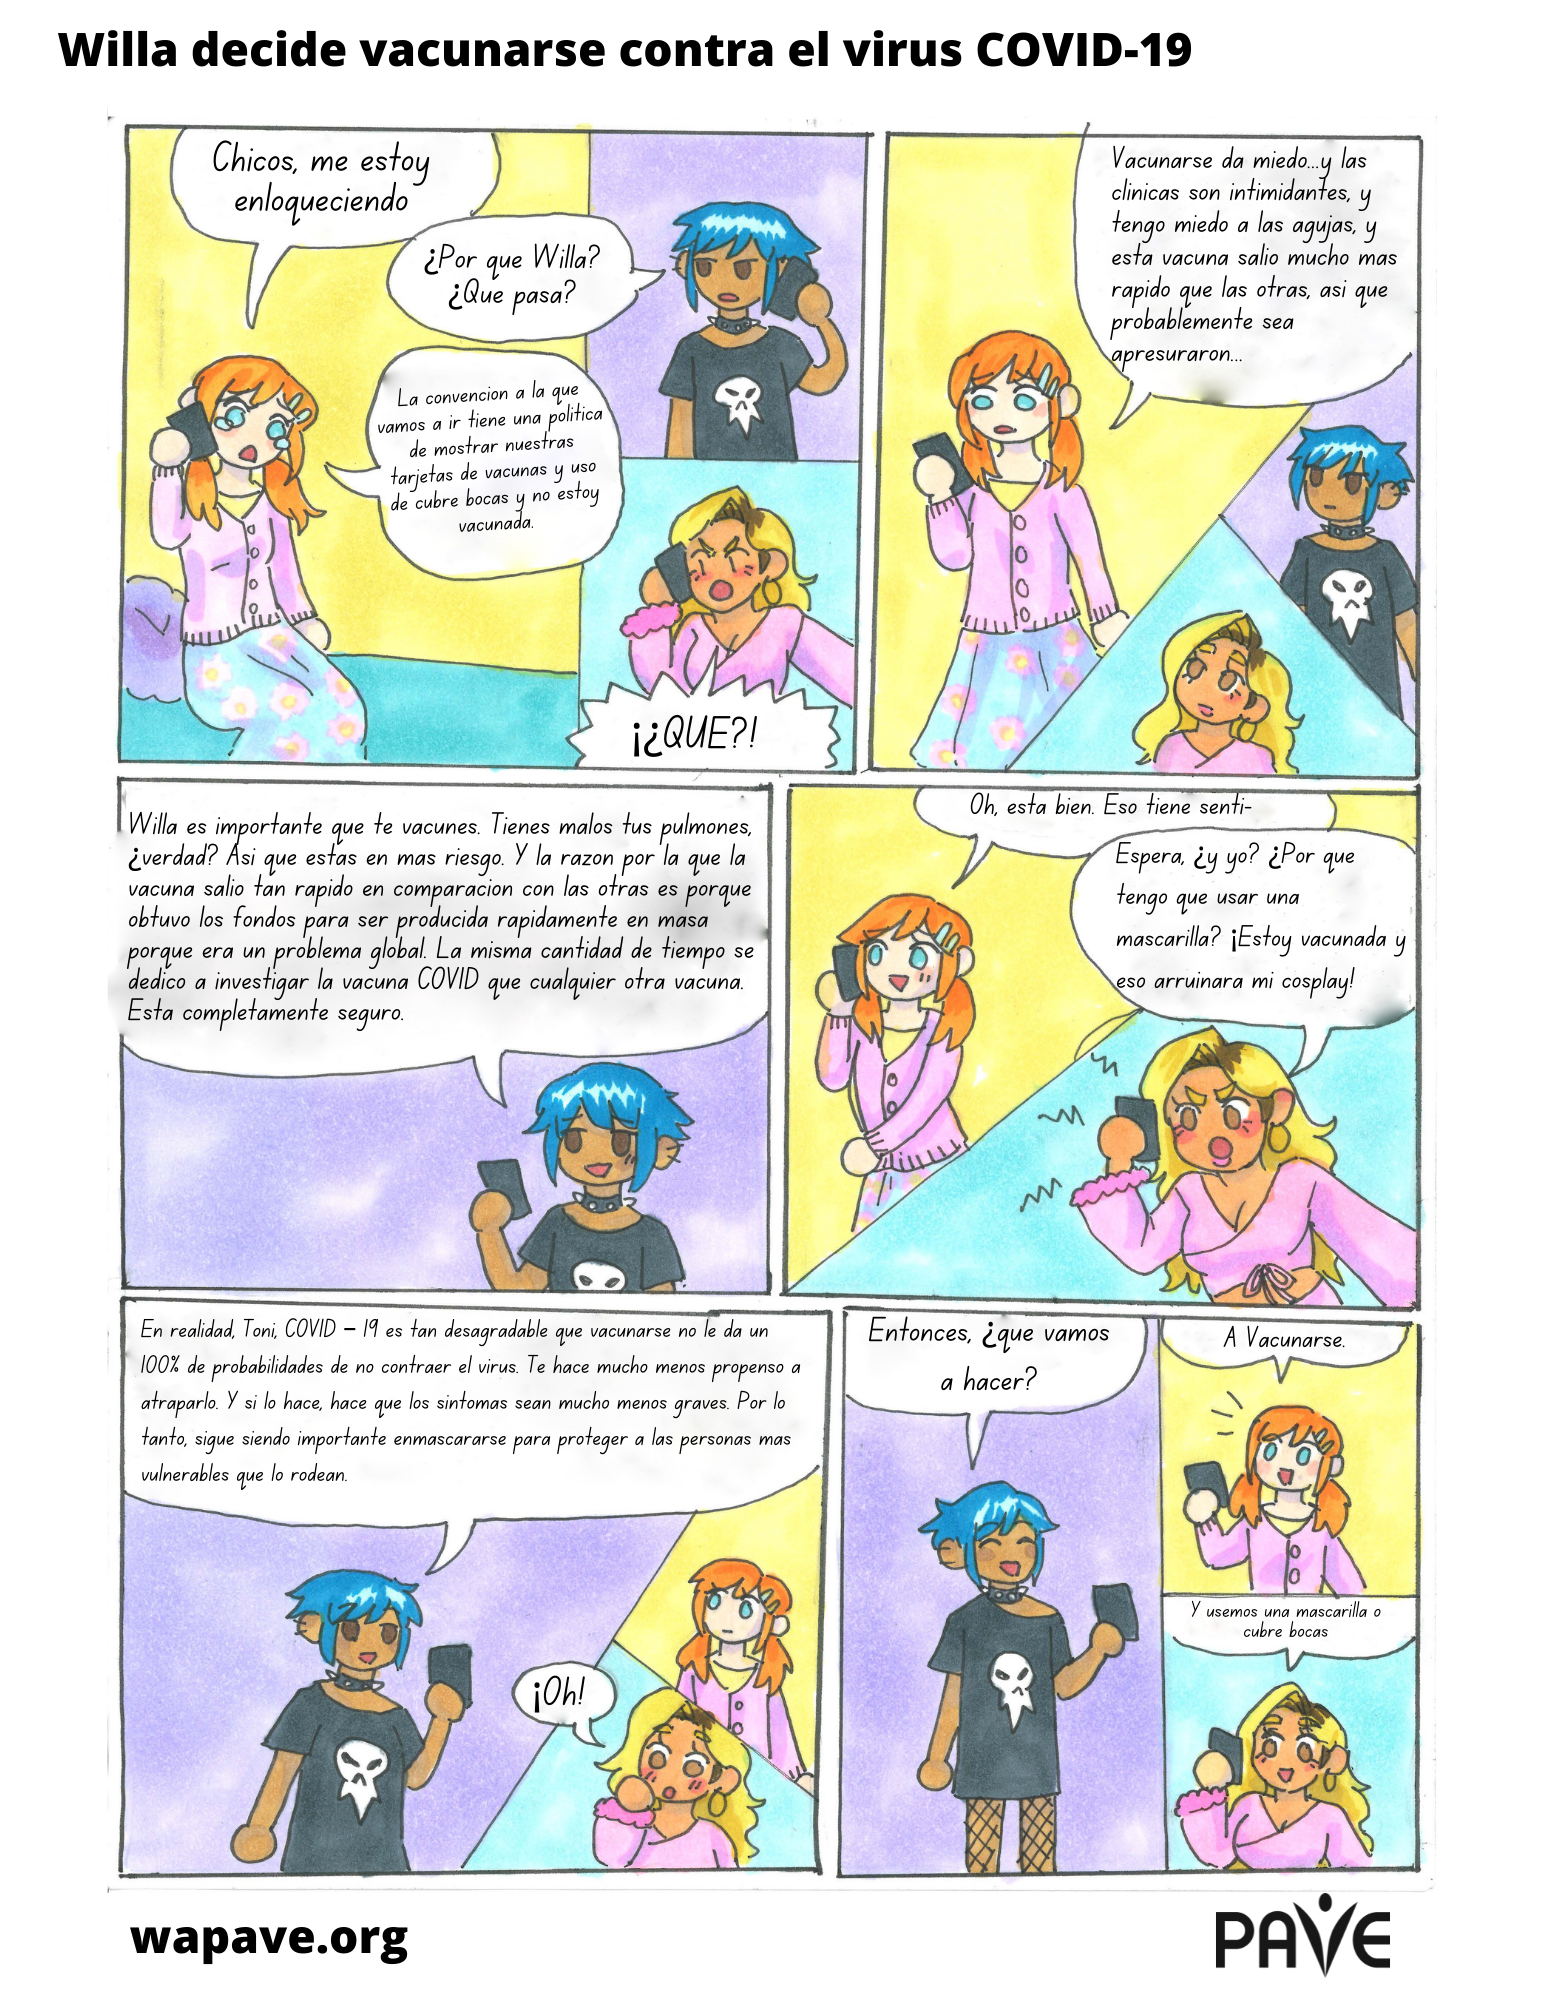 Comic page about Willa a character that decides to get vaccinated against the COVID-19 virus in Spanish